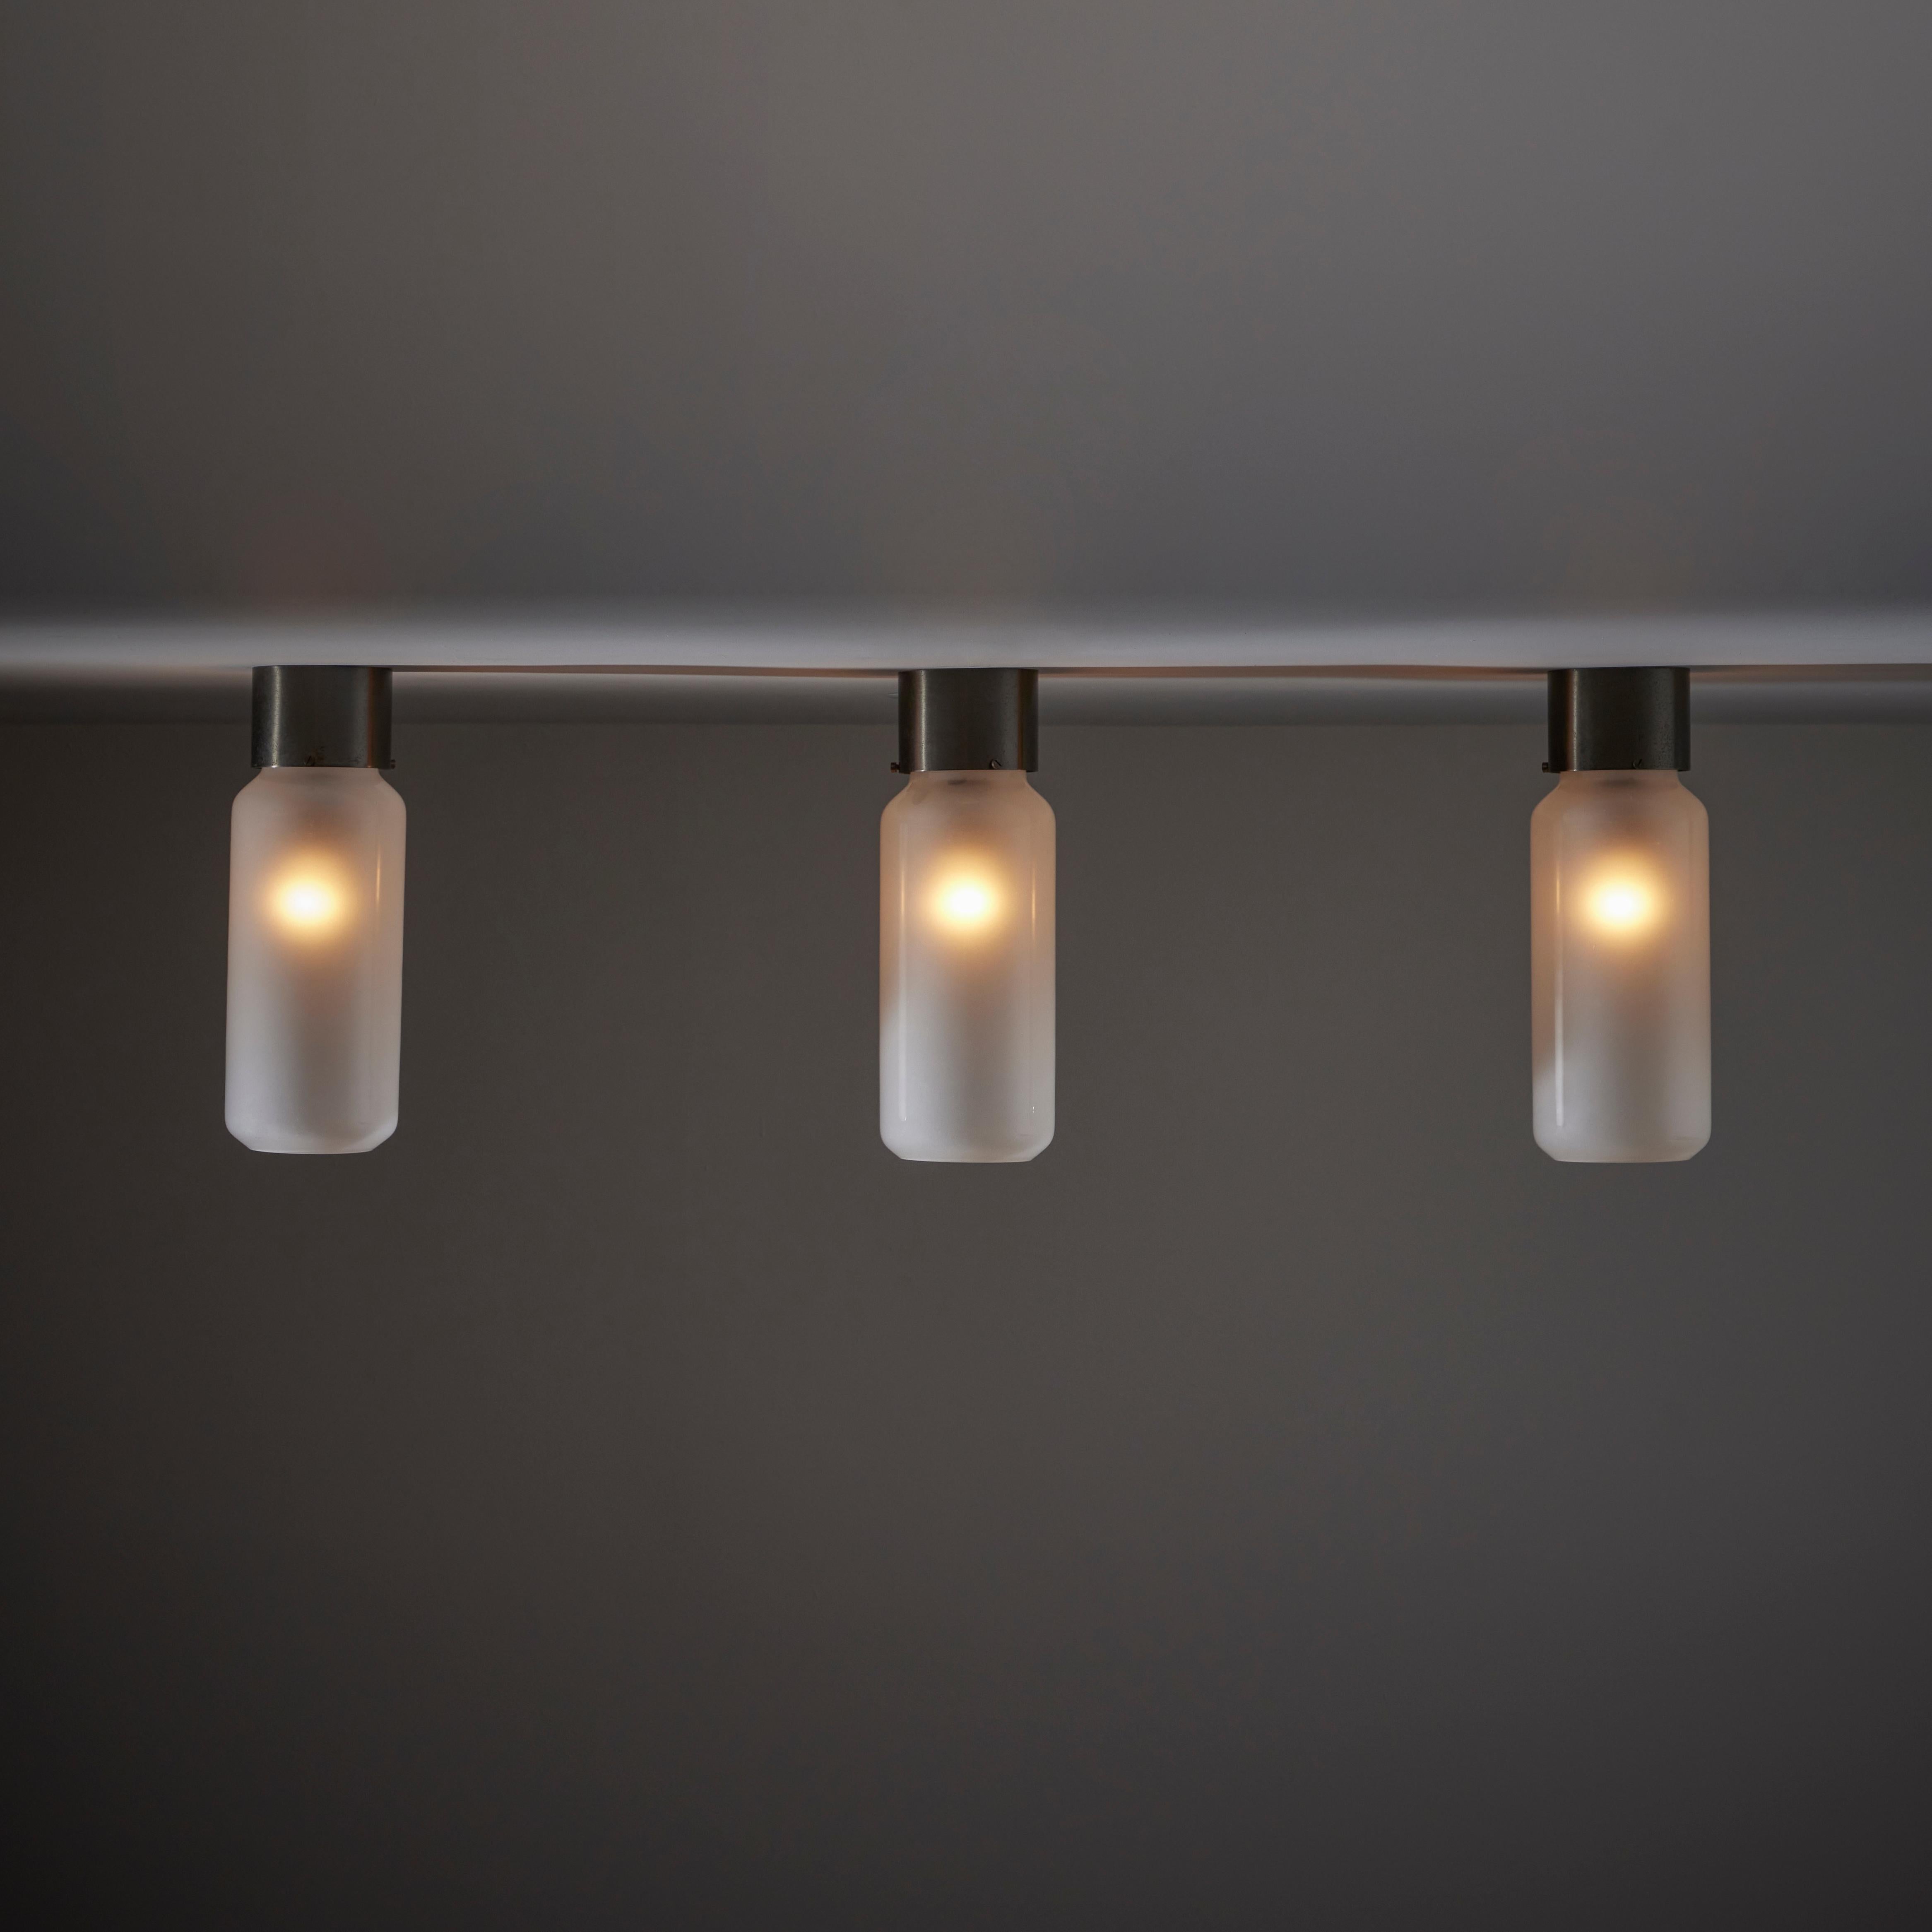 'Bidone' flush mounts by Caccia Dominioni for Azucena. Designed and manufactured in Italy, in 1958. Industrial flush mounts with blackened polished steel canopy and frosted glass cylindrical shade. Each sconce holds one E27 bulb, adapted for the US.